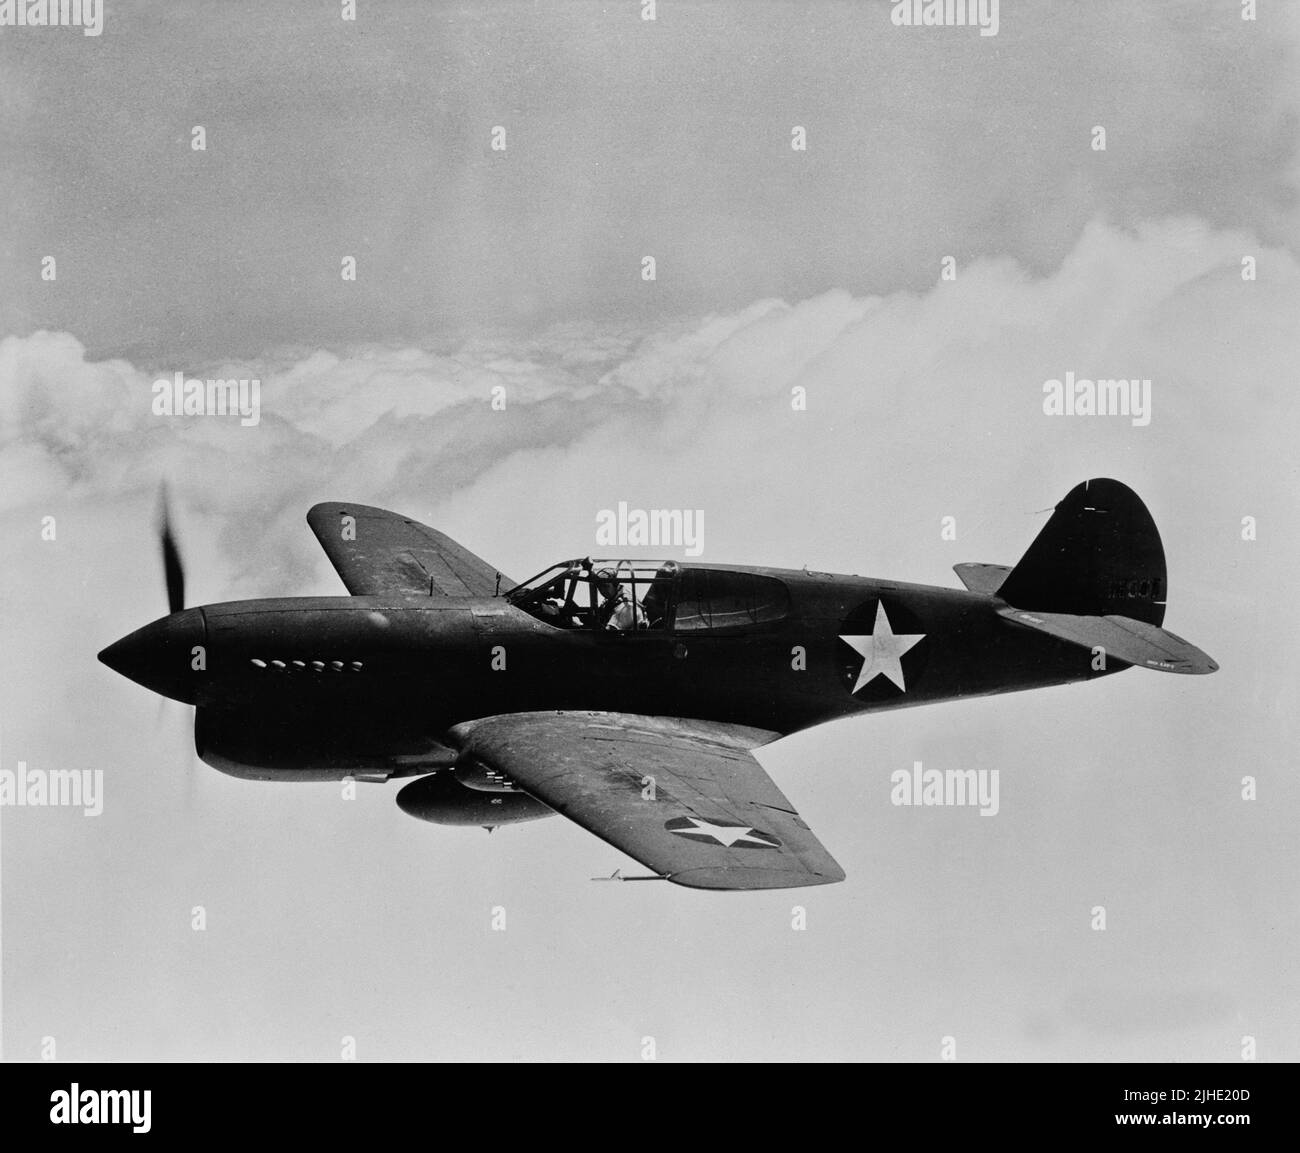 Vintage photo circa 1942 of an American Curtis P-40 single-engine fighter plane in flight. It served with the RAF (Royal Air Force) and with the AVG (American Volunteer Group or Flying Tigers) in China and with the US army air force in the Pacific theatre Stock Photo